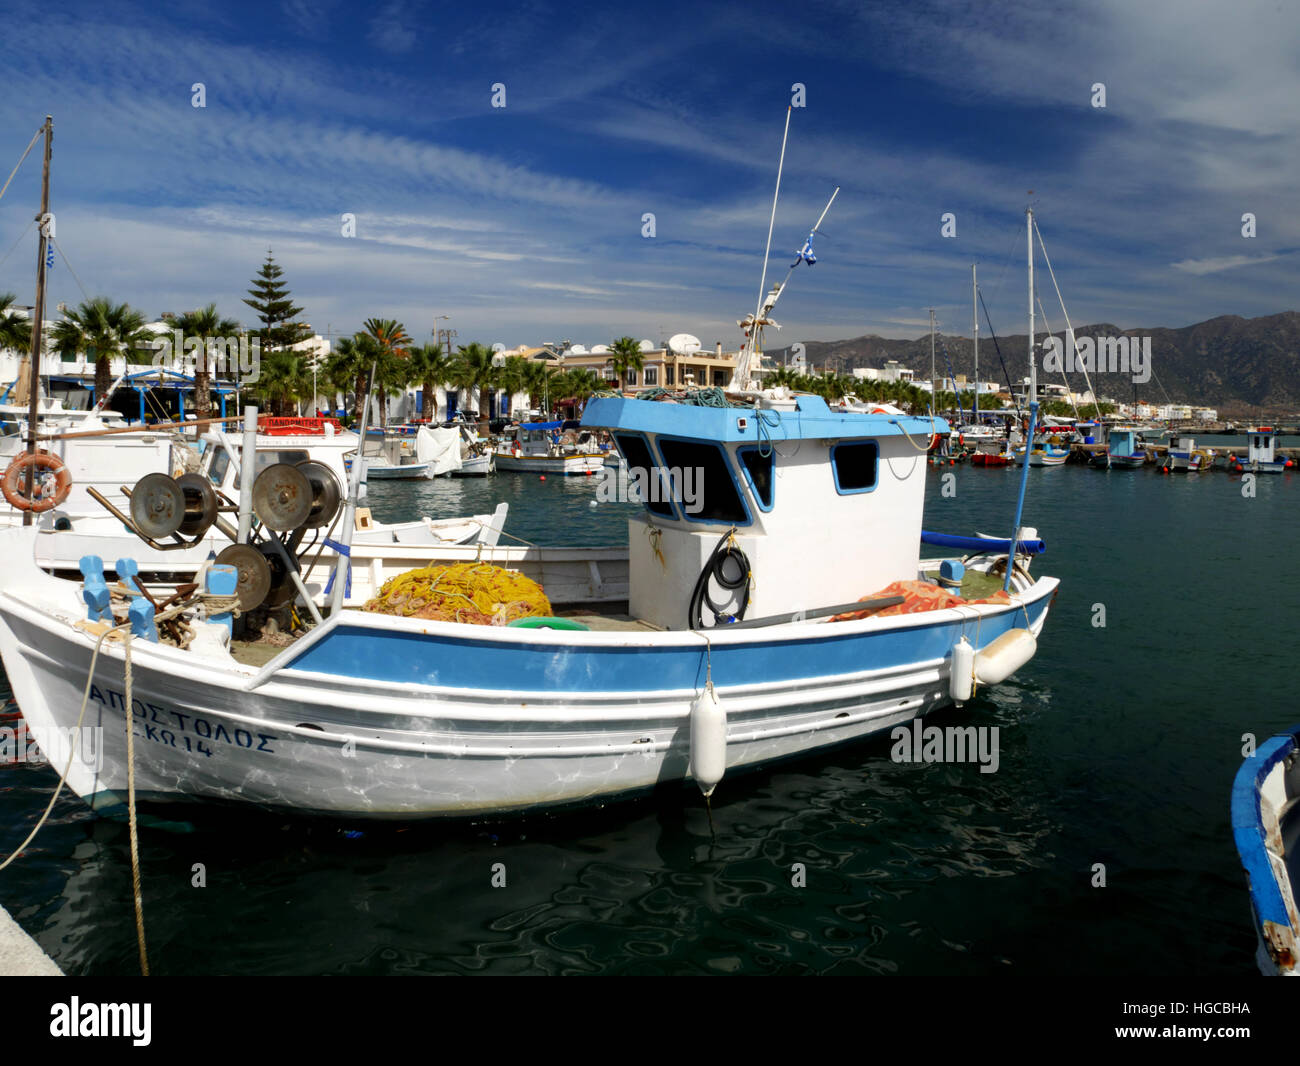 Boats moored in the harbour, Kardamena, Kos, Greece. Stock Photo